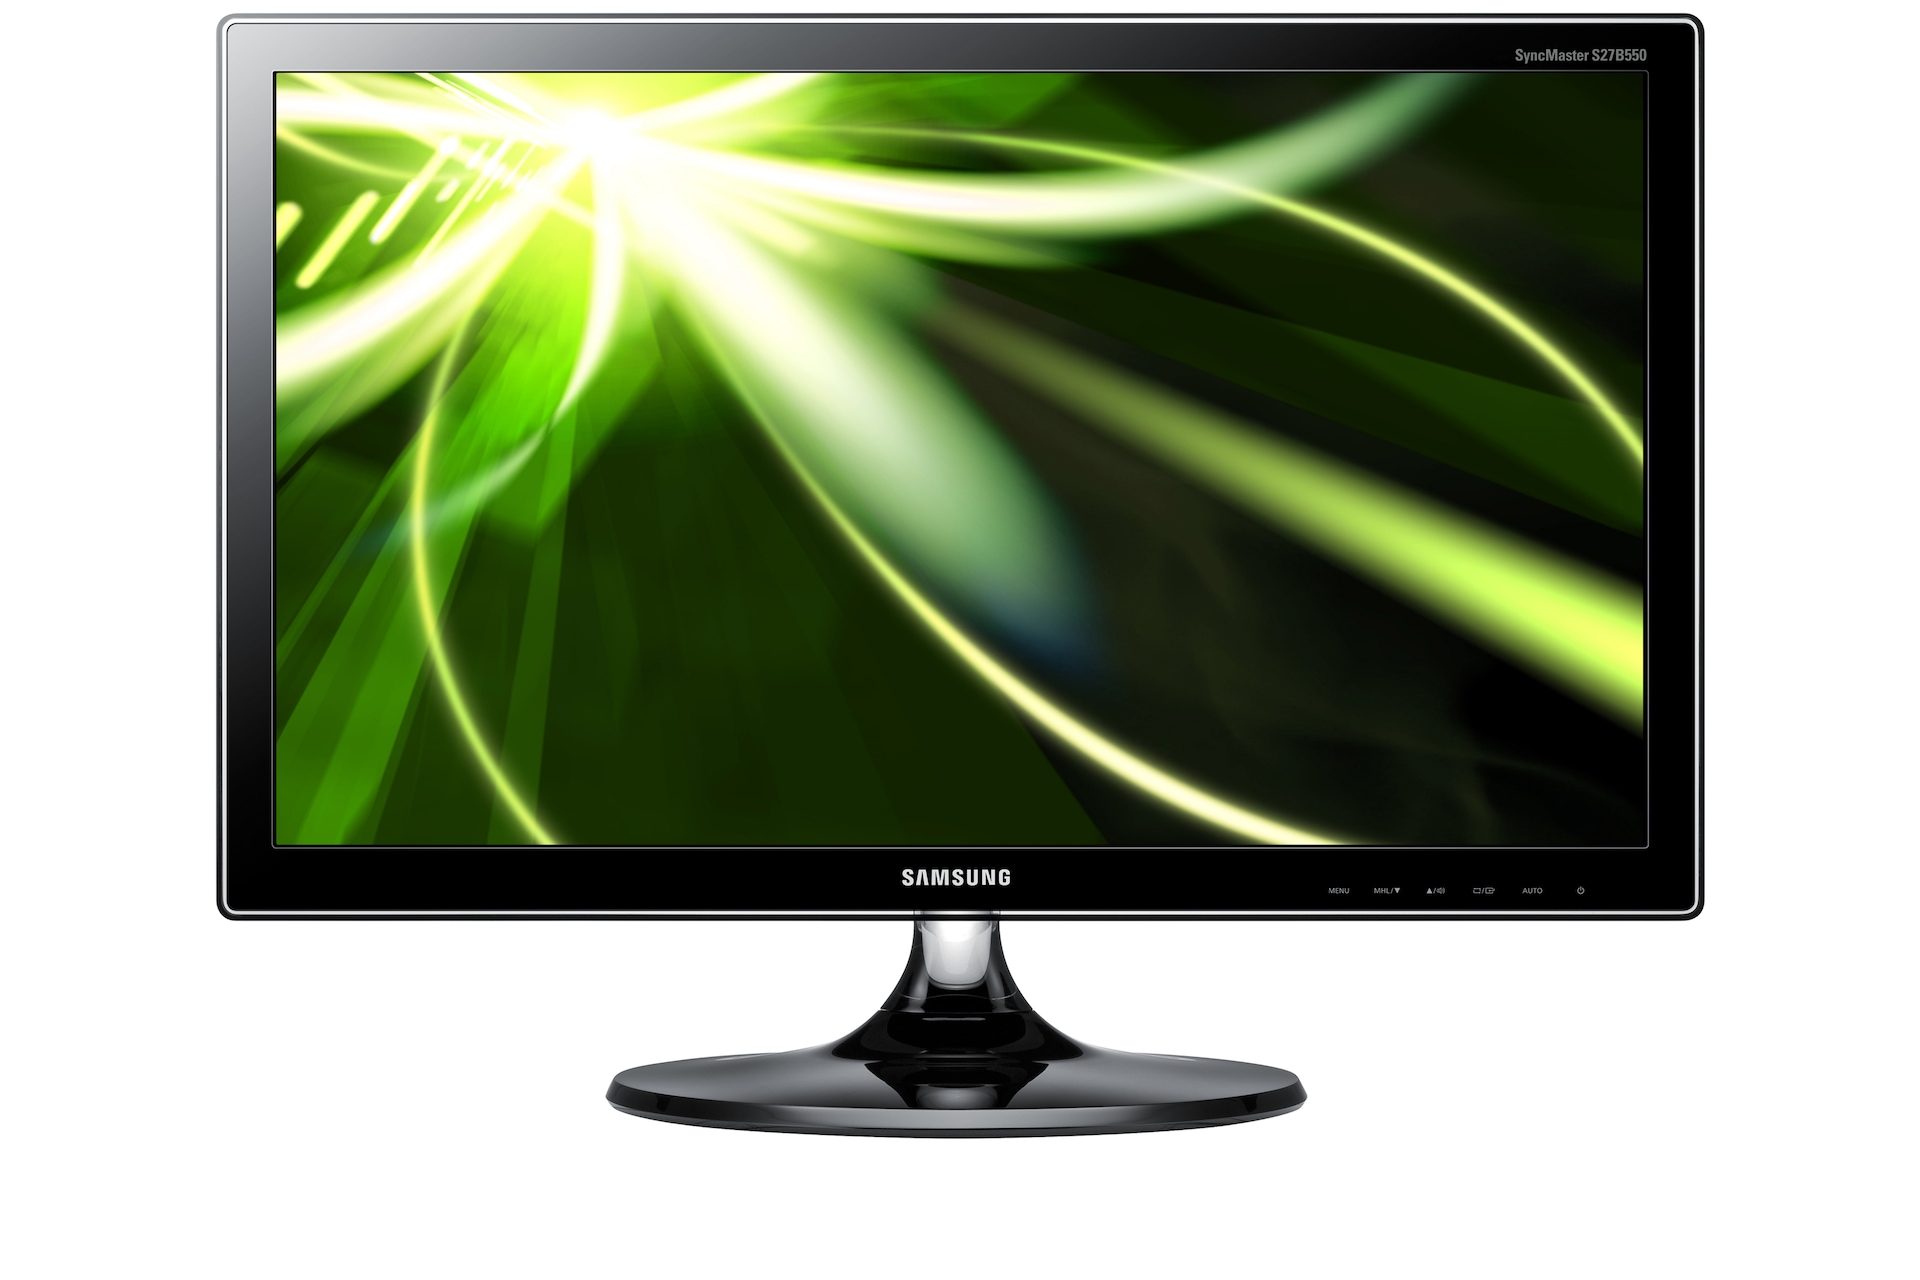 27" Series 5 LED Monitor with Built-in speakers | Samsung